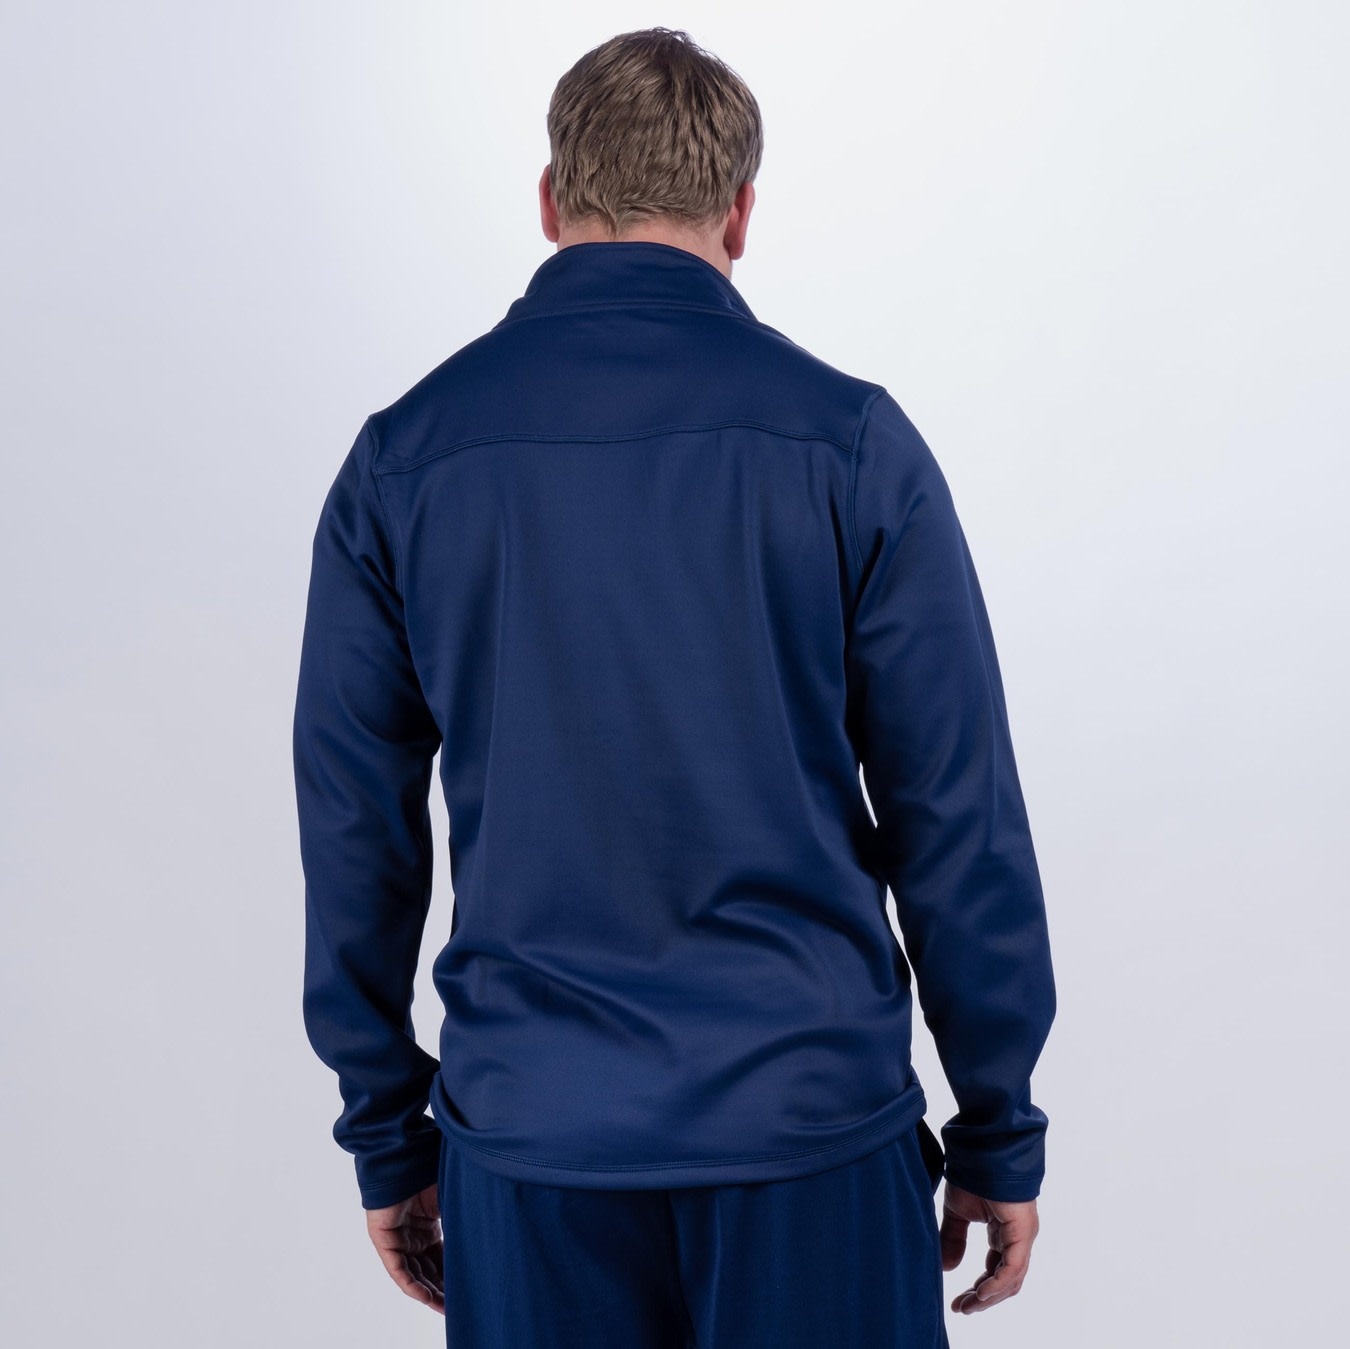 Adults Storm Thermo Fleece